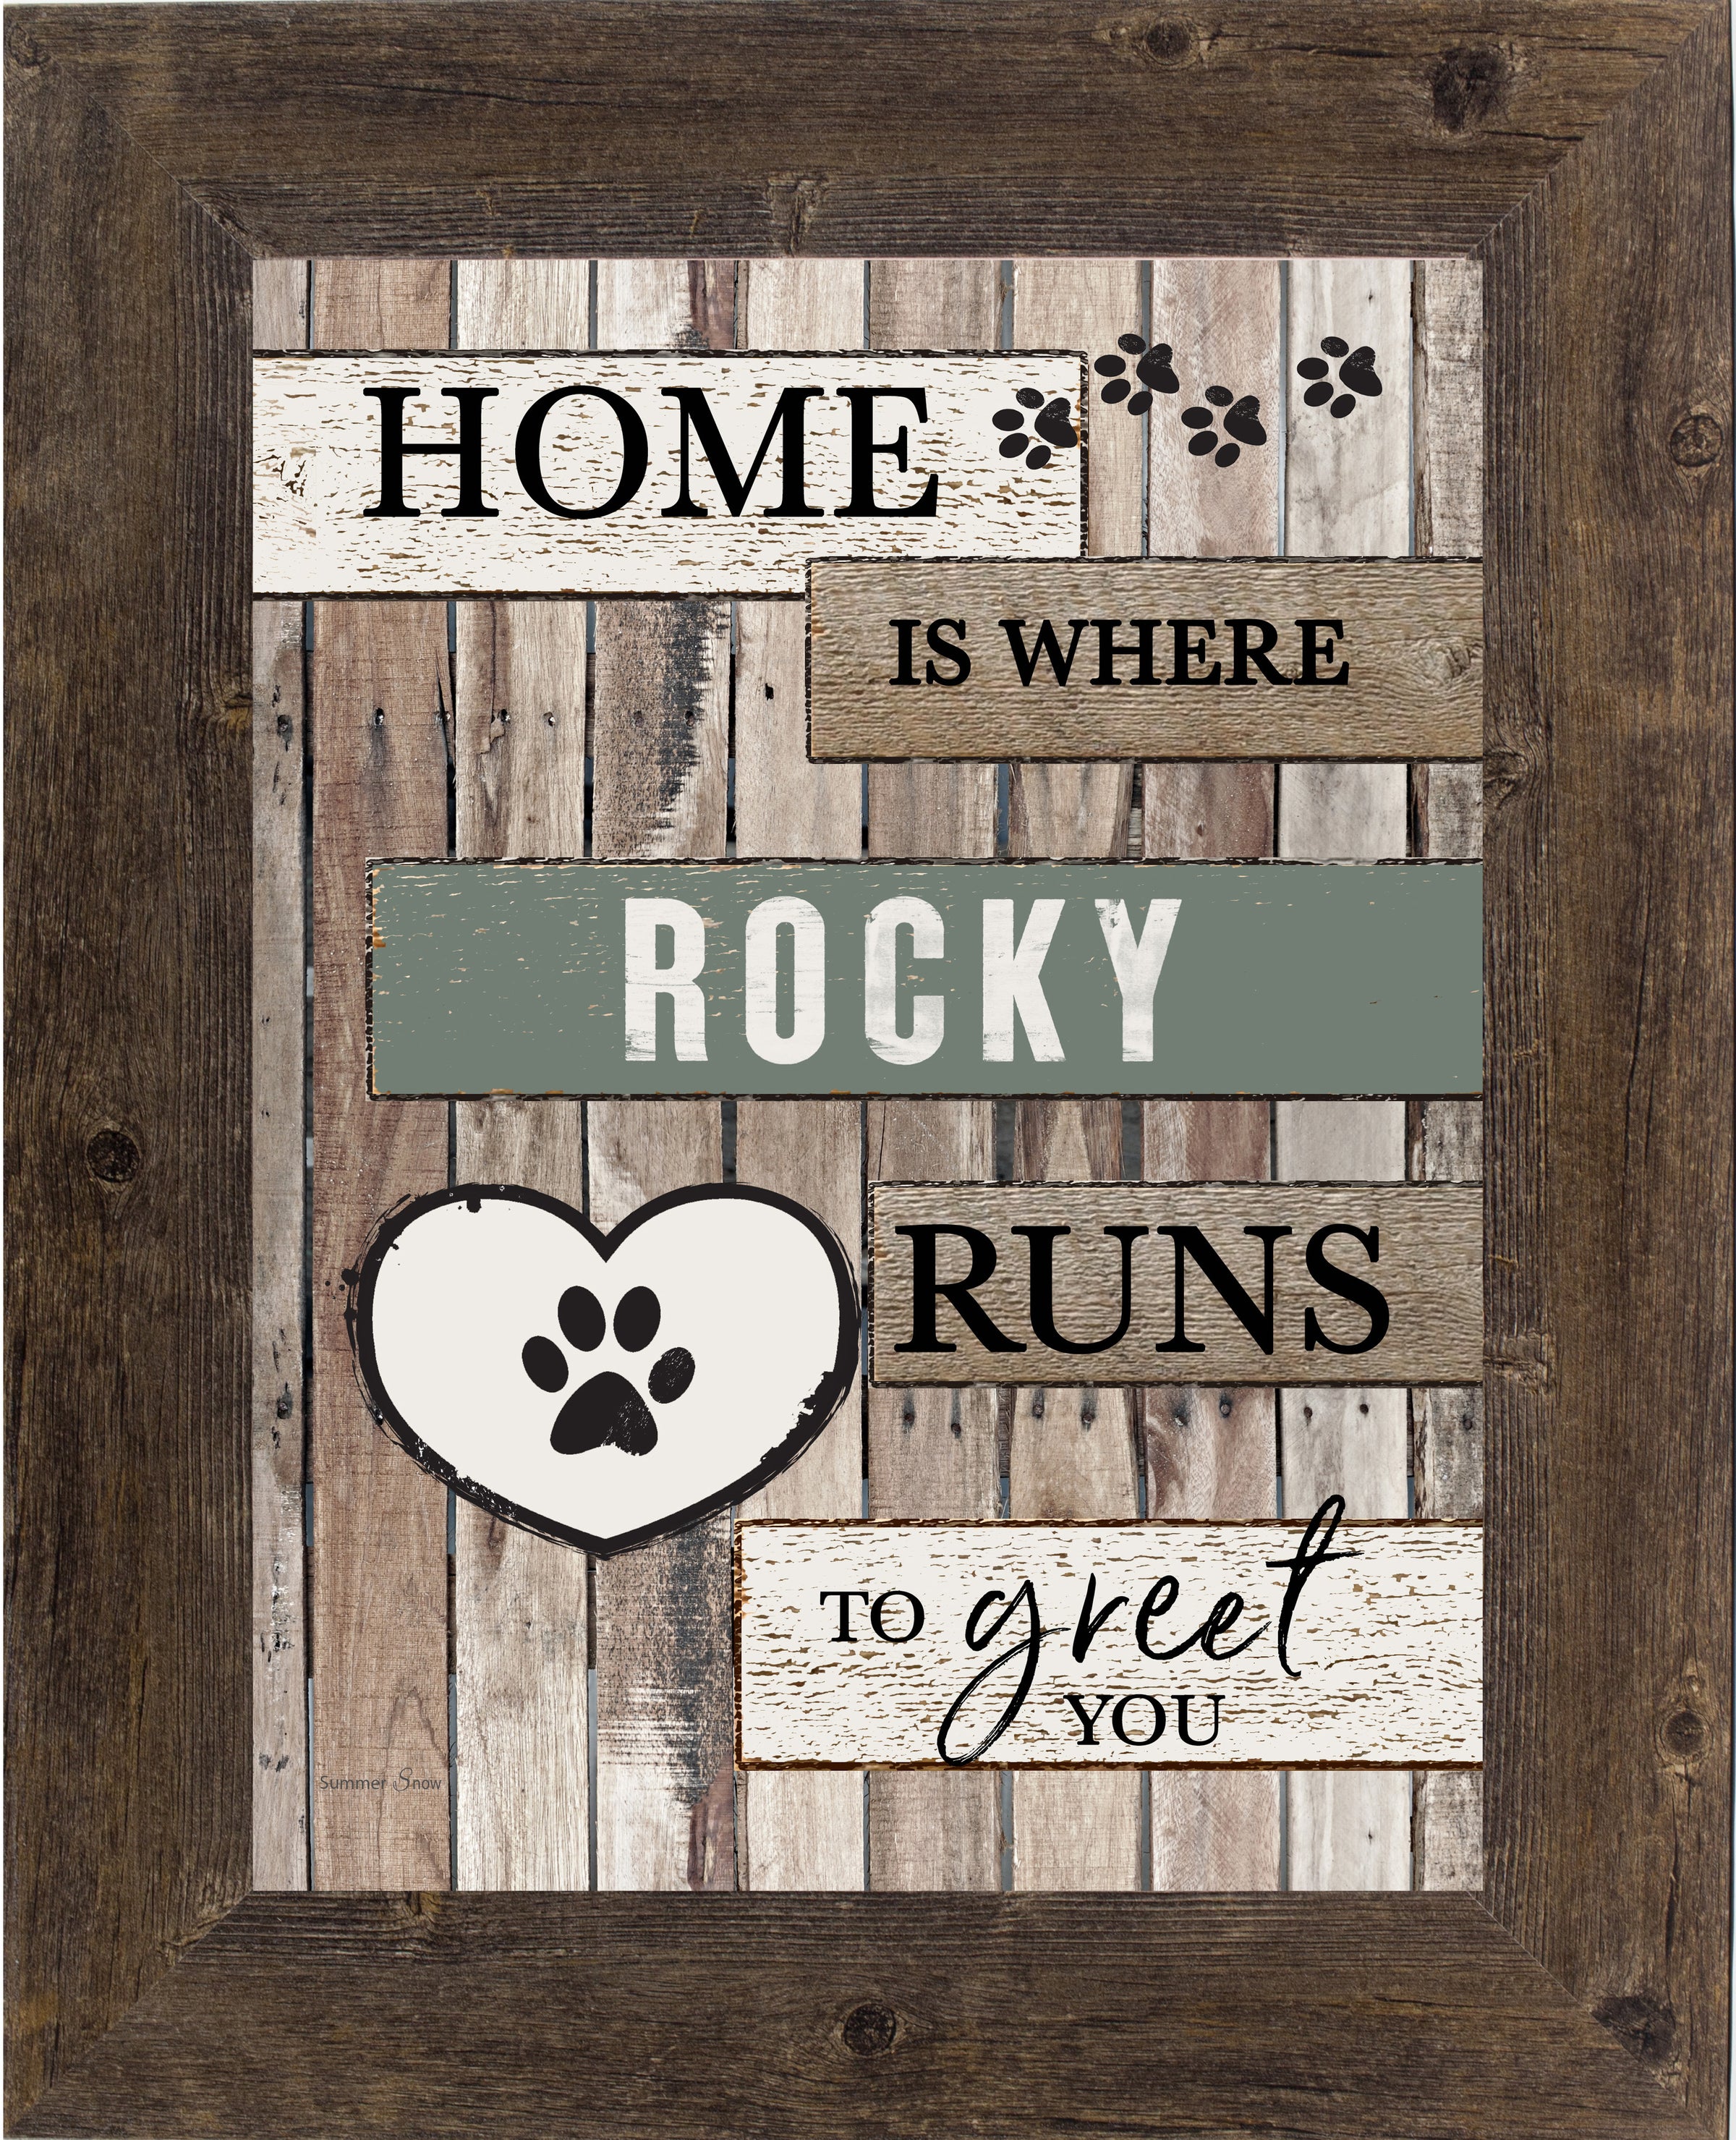 Personalized Home is Where Someone Runs to Greet You by Summer Snow PER158